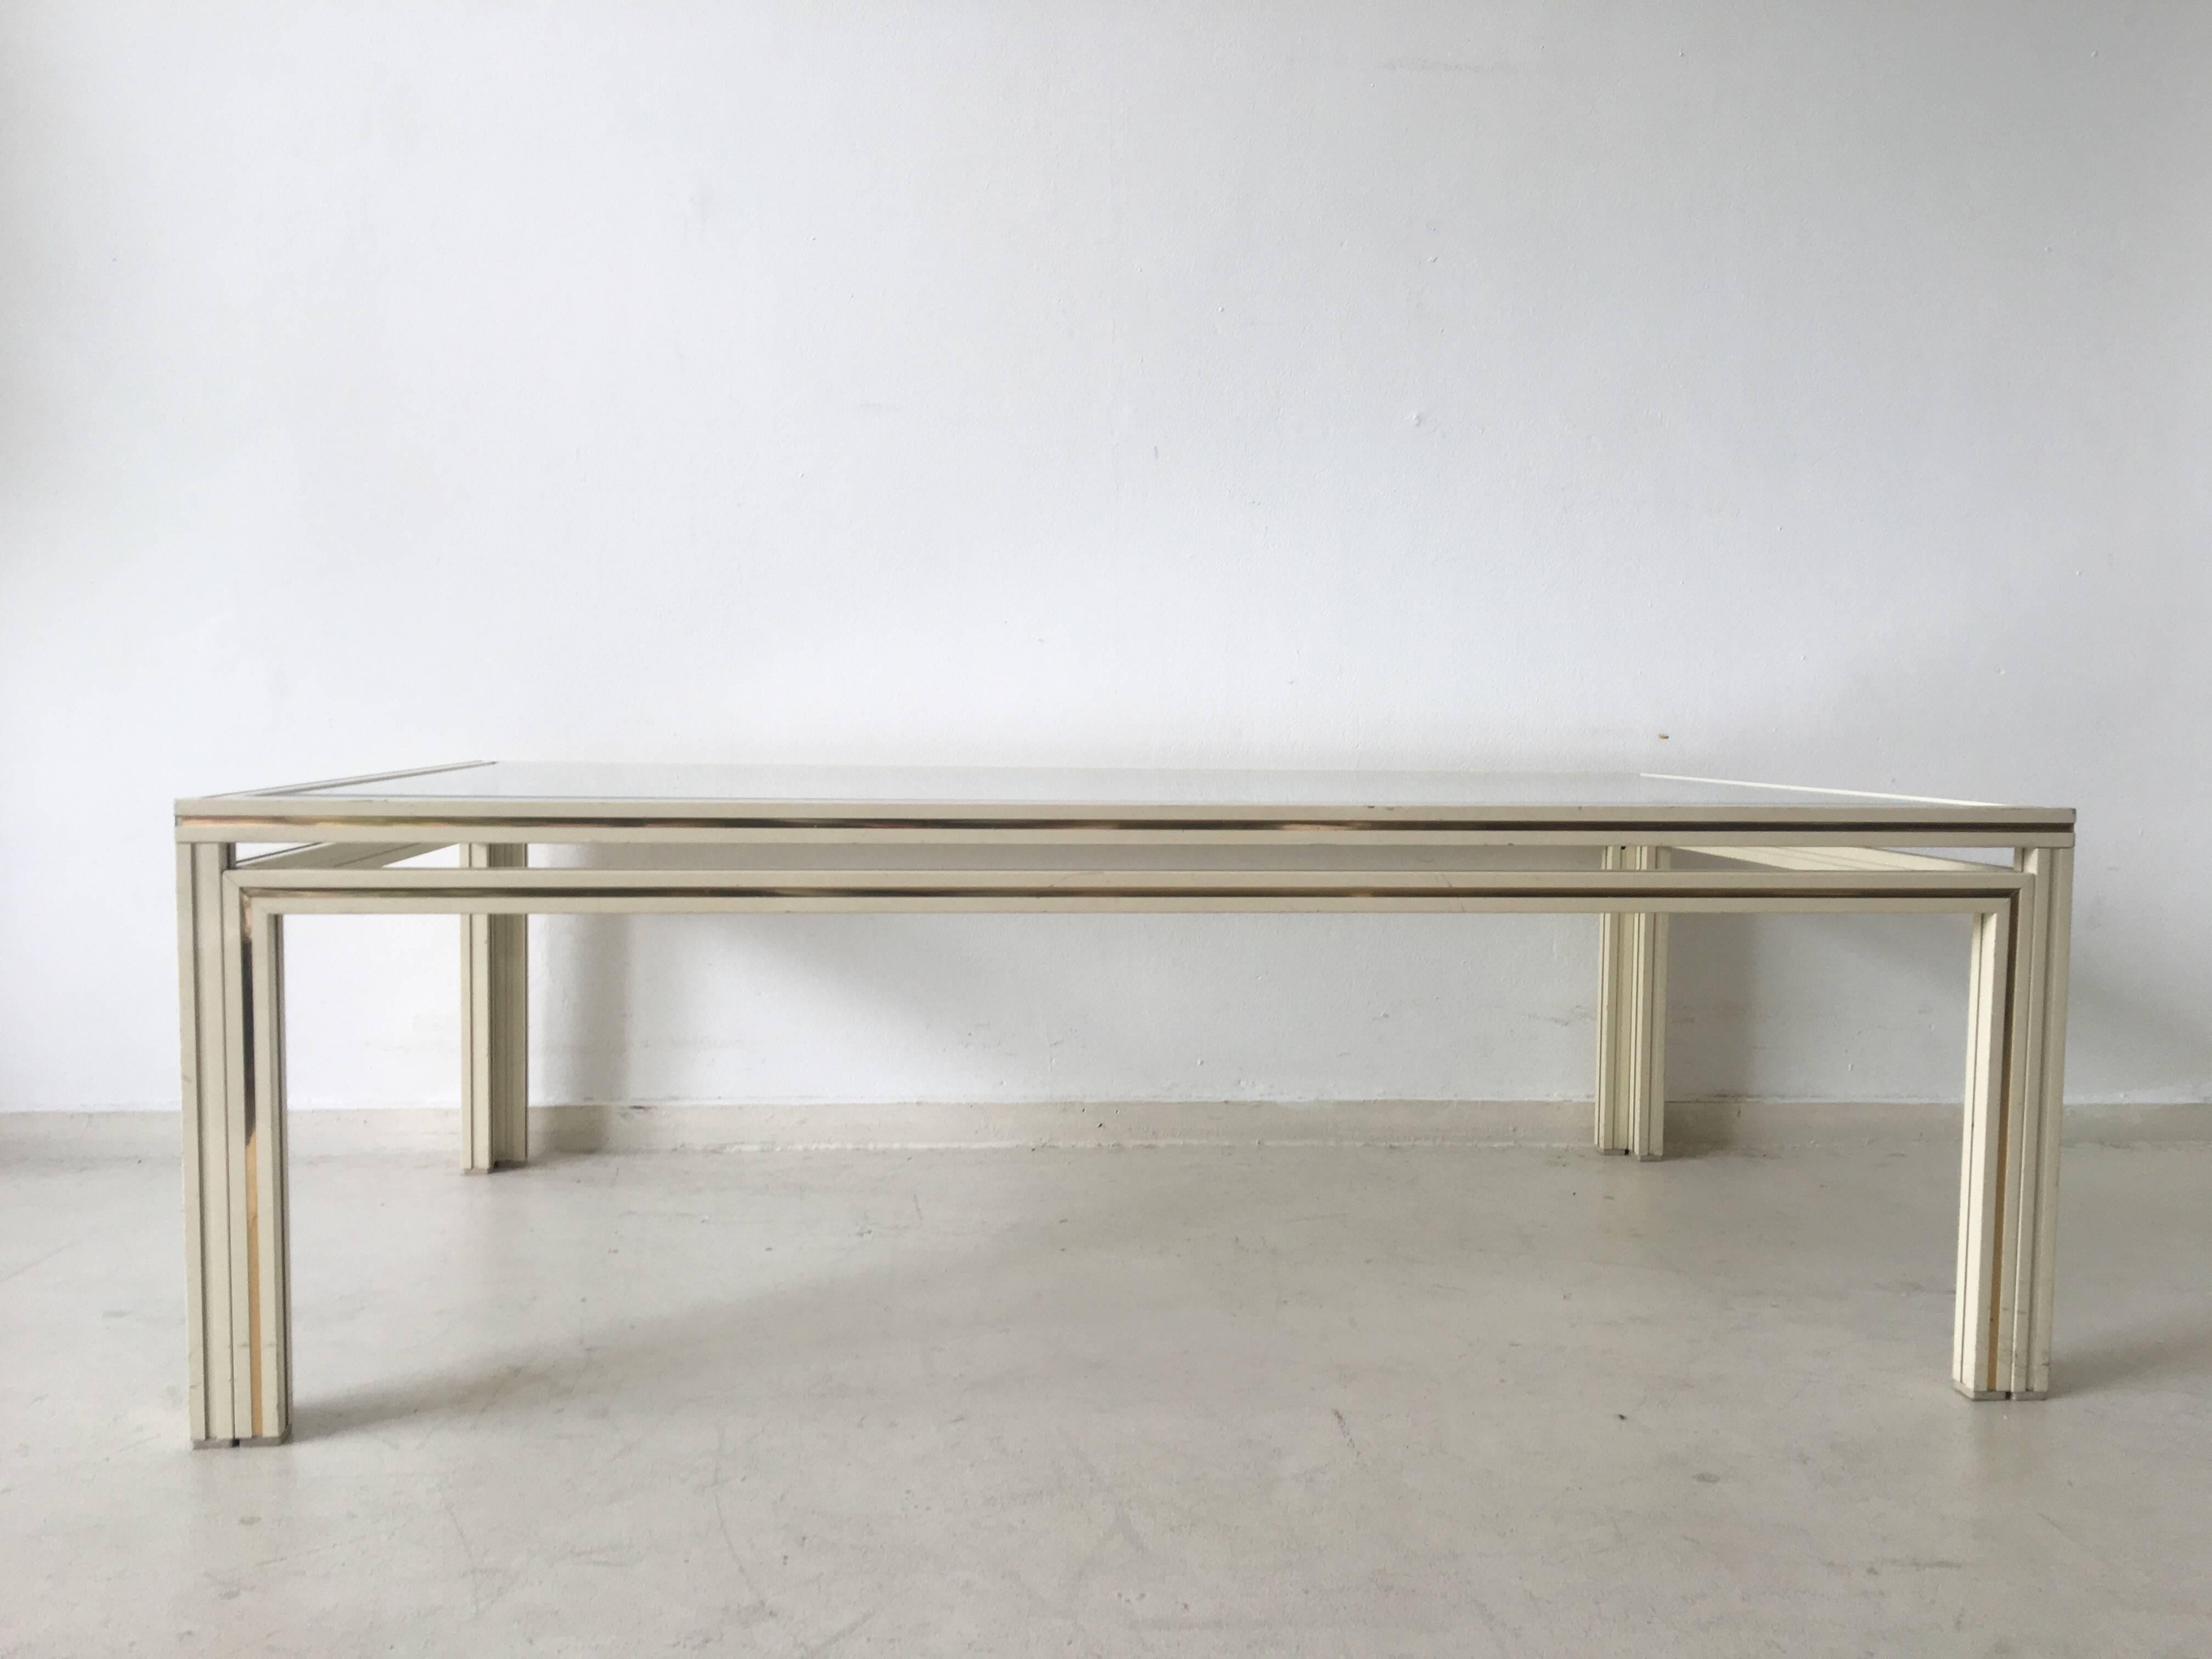 This chique French coffee table consists a bevelled glass top and aluminium base with off-white and gold colored finish. The table remains in good condition with wear consisting with age a use.